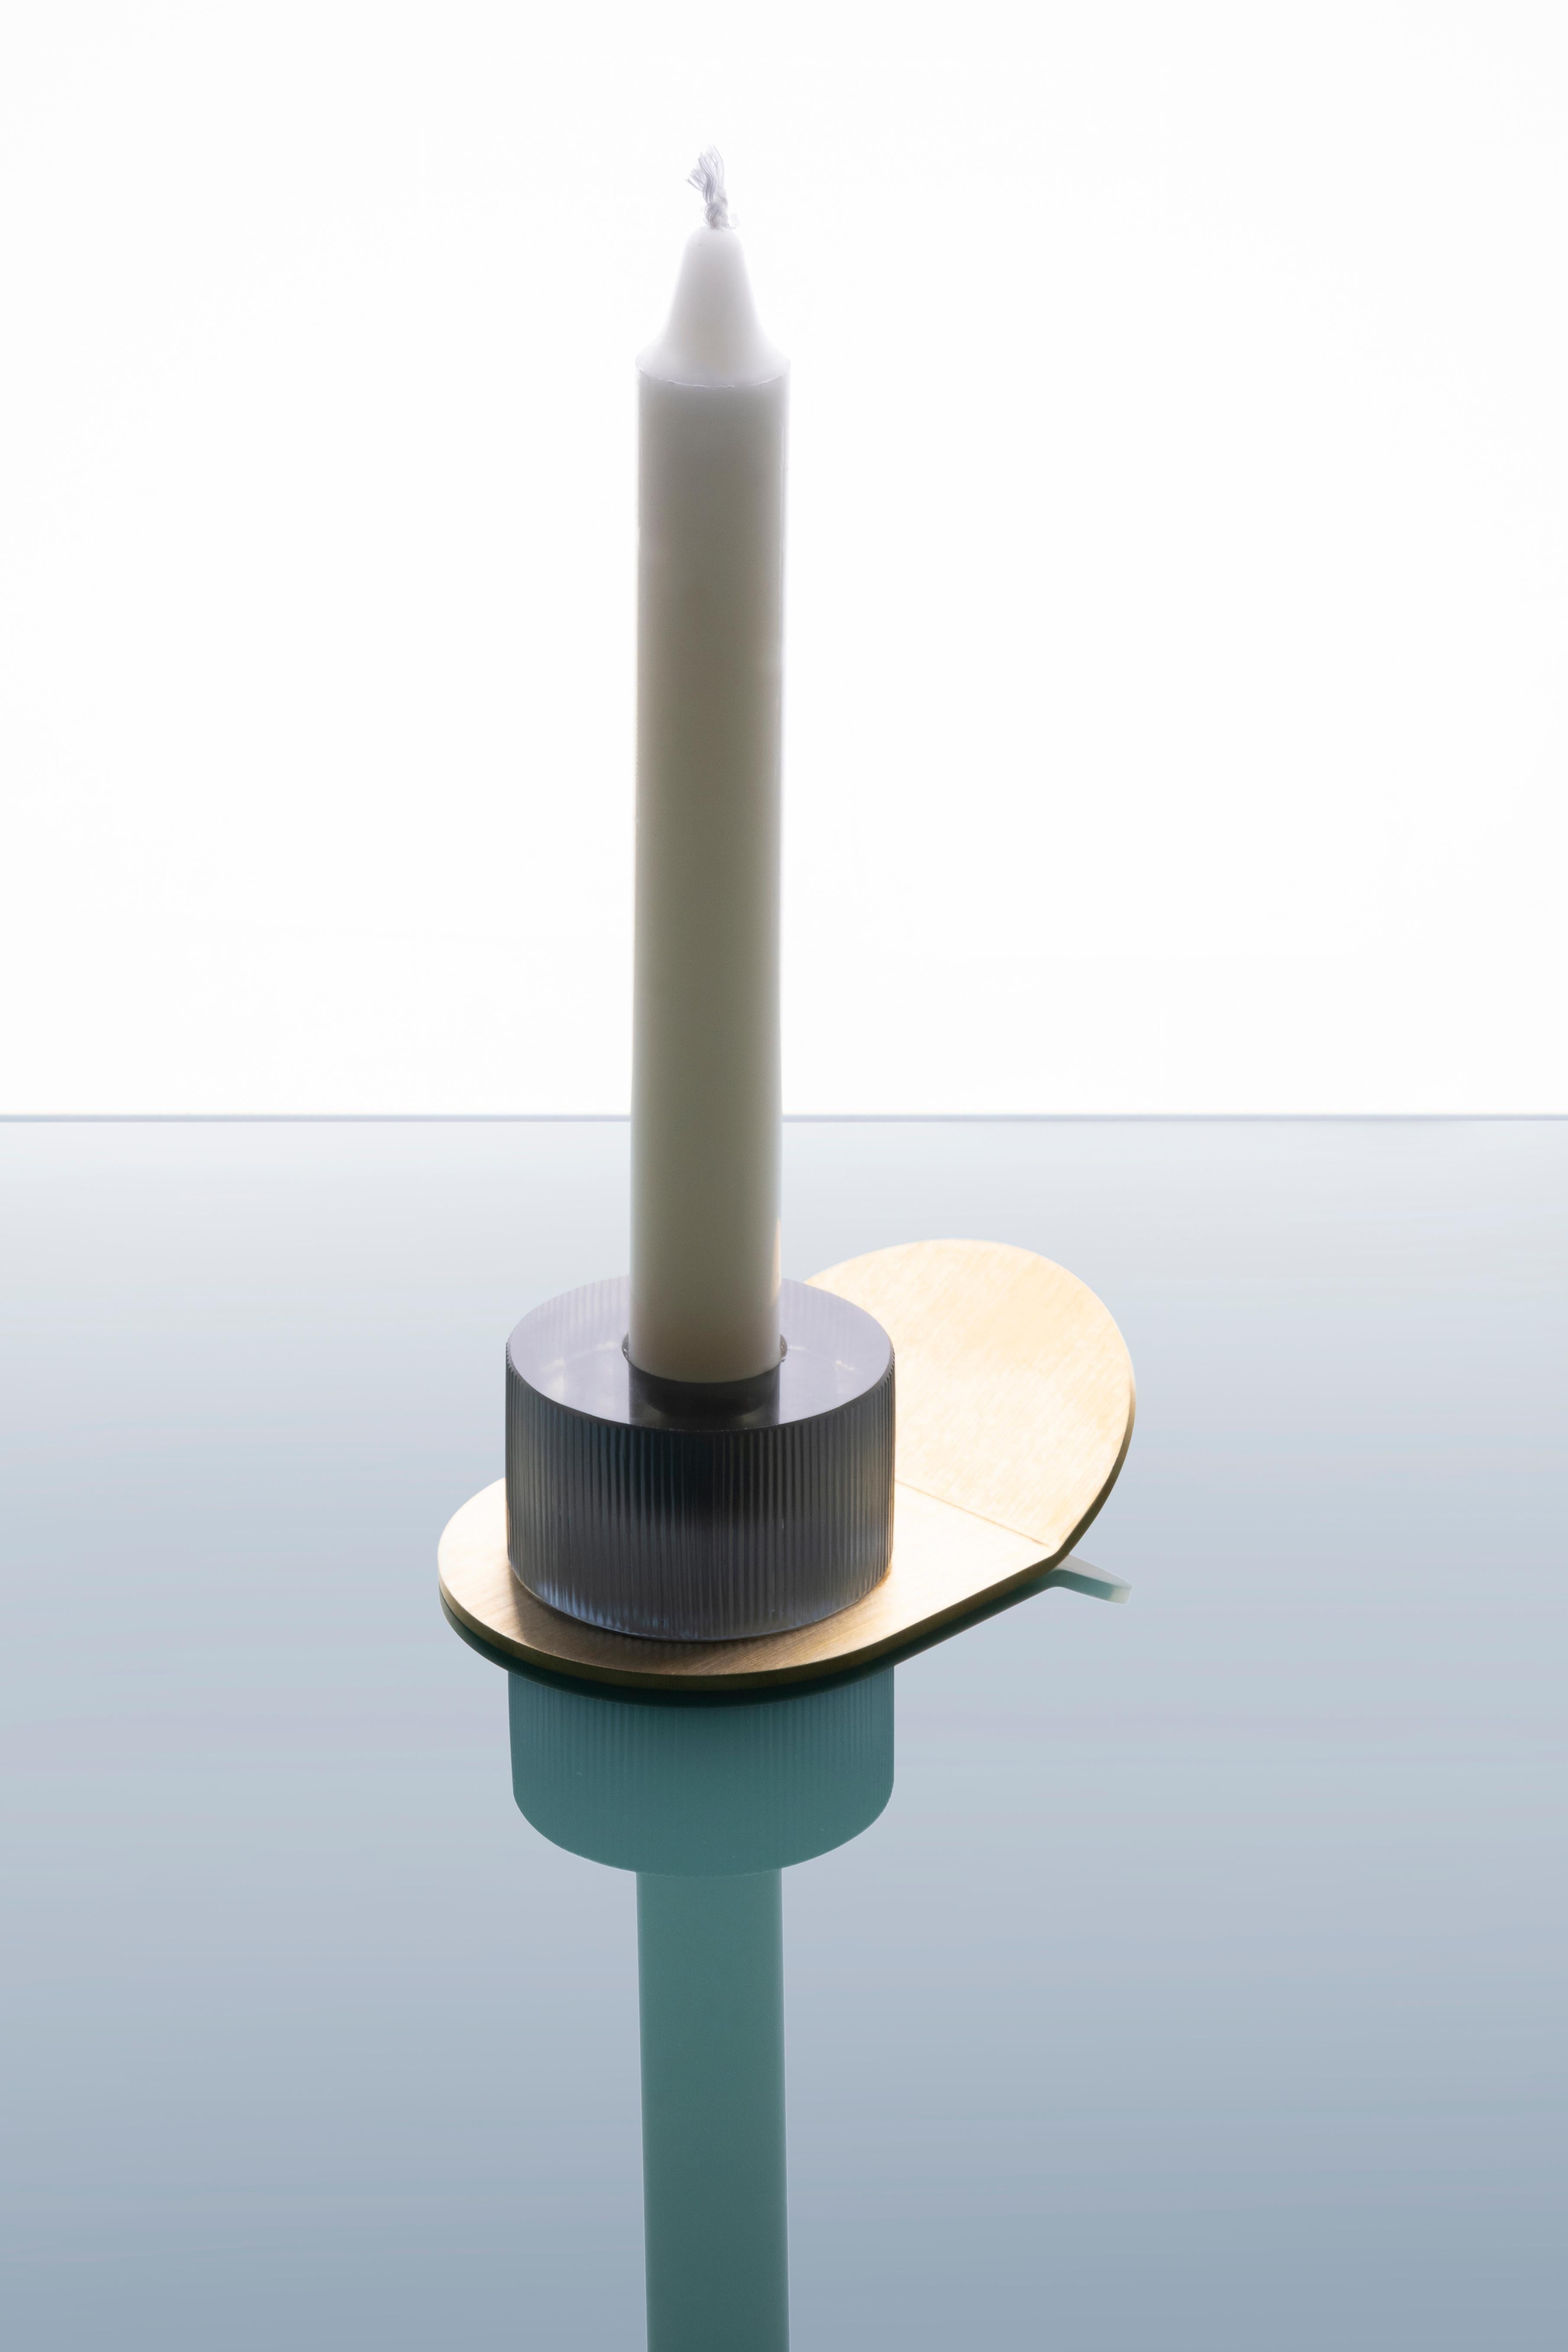 Incisioni Lumino candle holder by Purho
Dimensions: D12 x W8 x H3.5 cm
Materials: Glass, Brass
Other colours and finishes are available.

Purho is a new protagonist of made in Italy design, a work of synthesis, a research that has lasted for